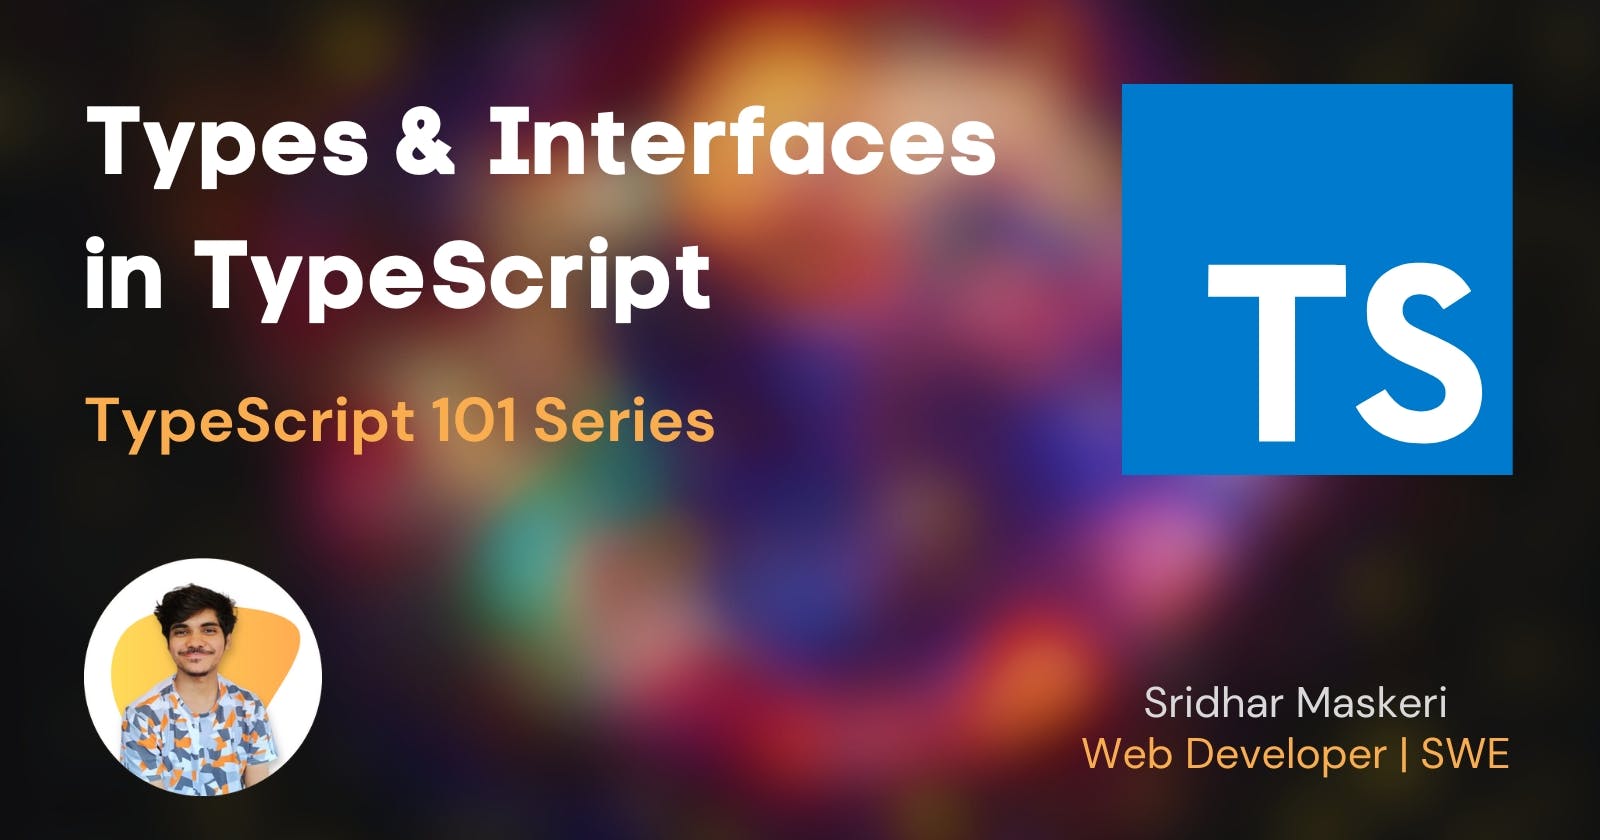 Types & Interfaces in TypeScript